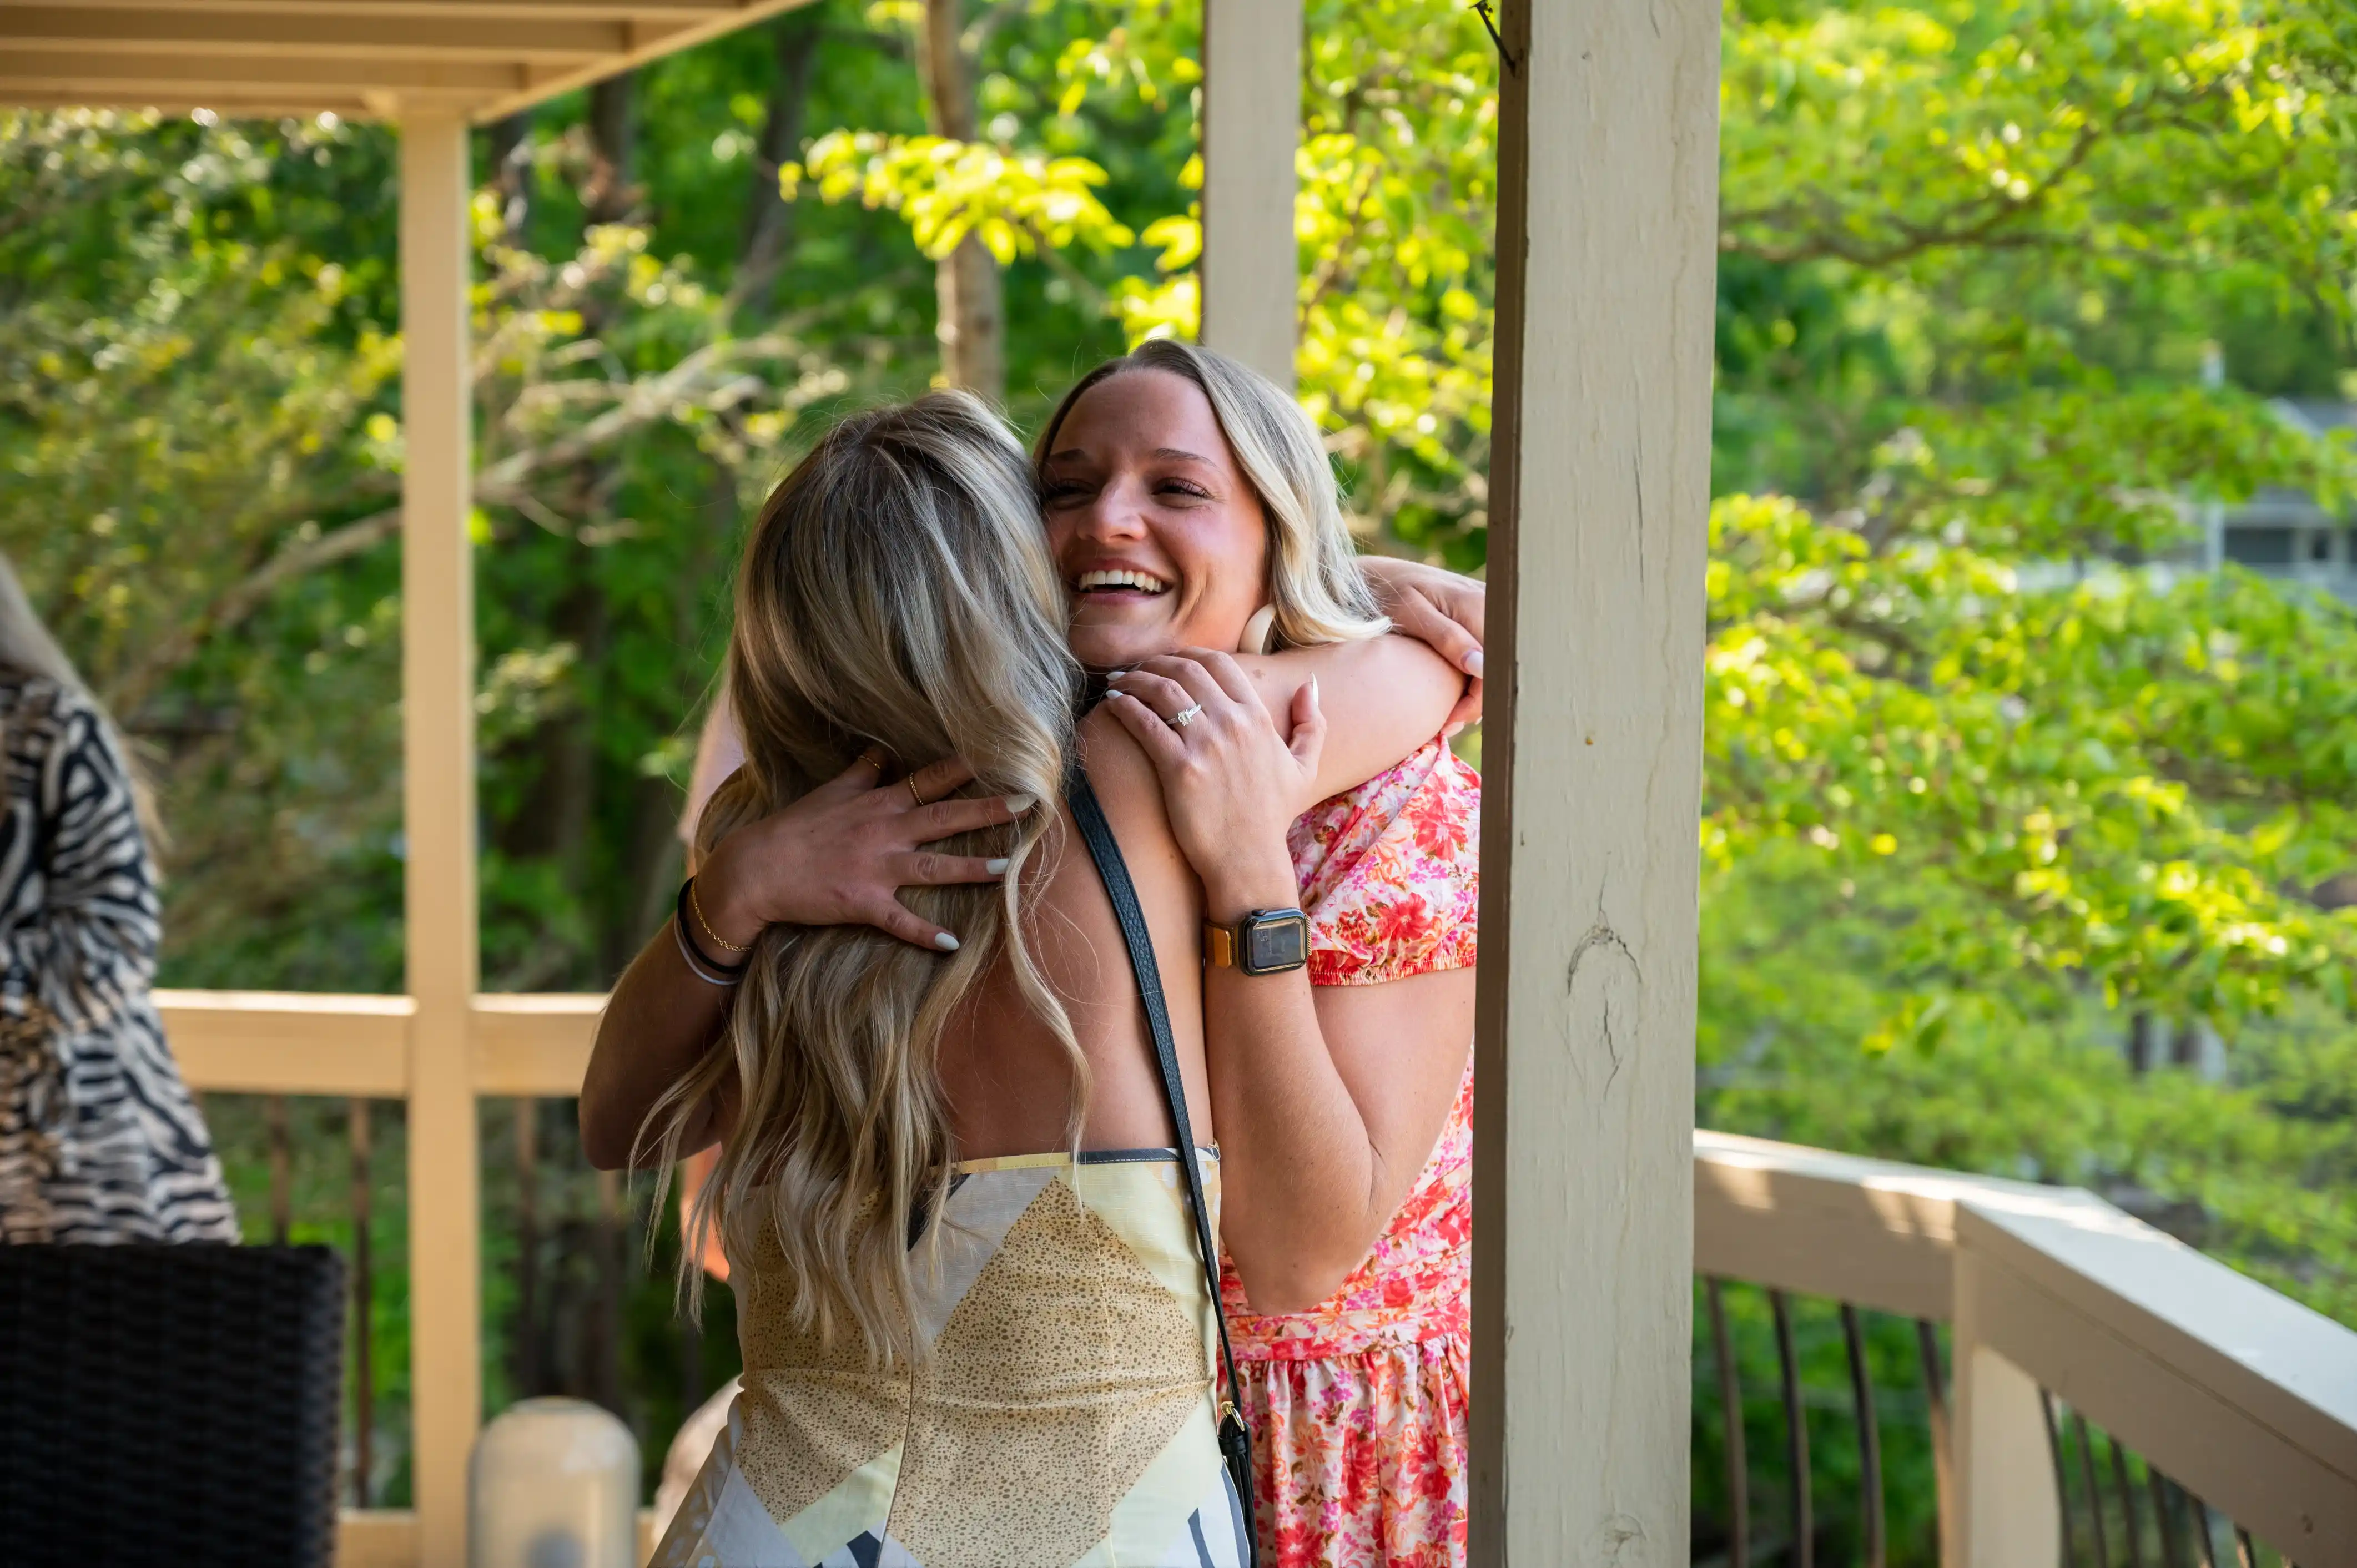 Two women embracing in a happy hug on a porch with trees in the background.